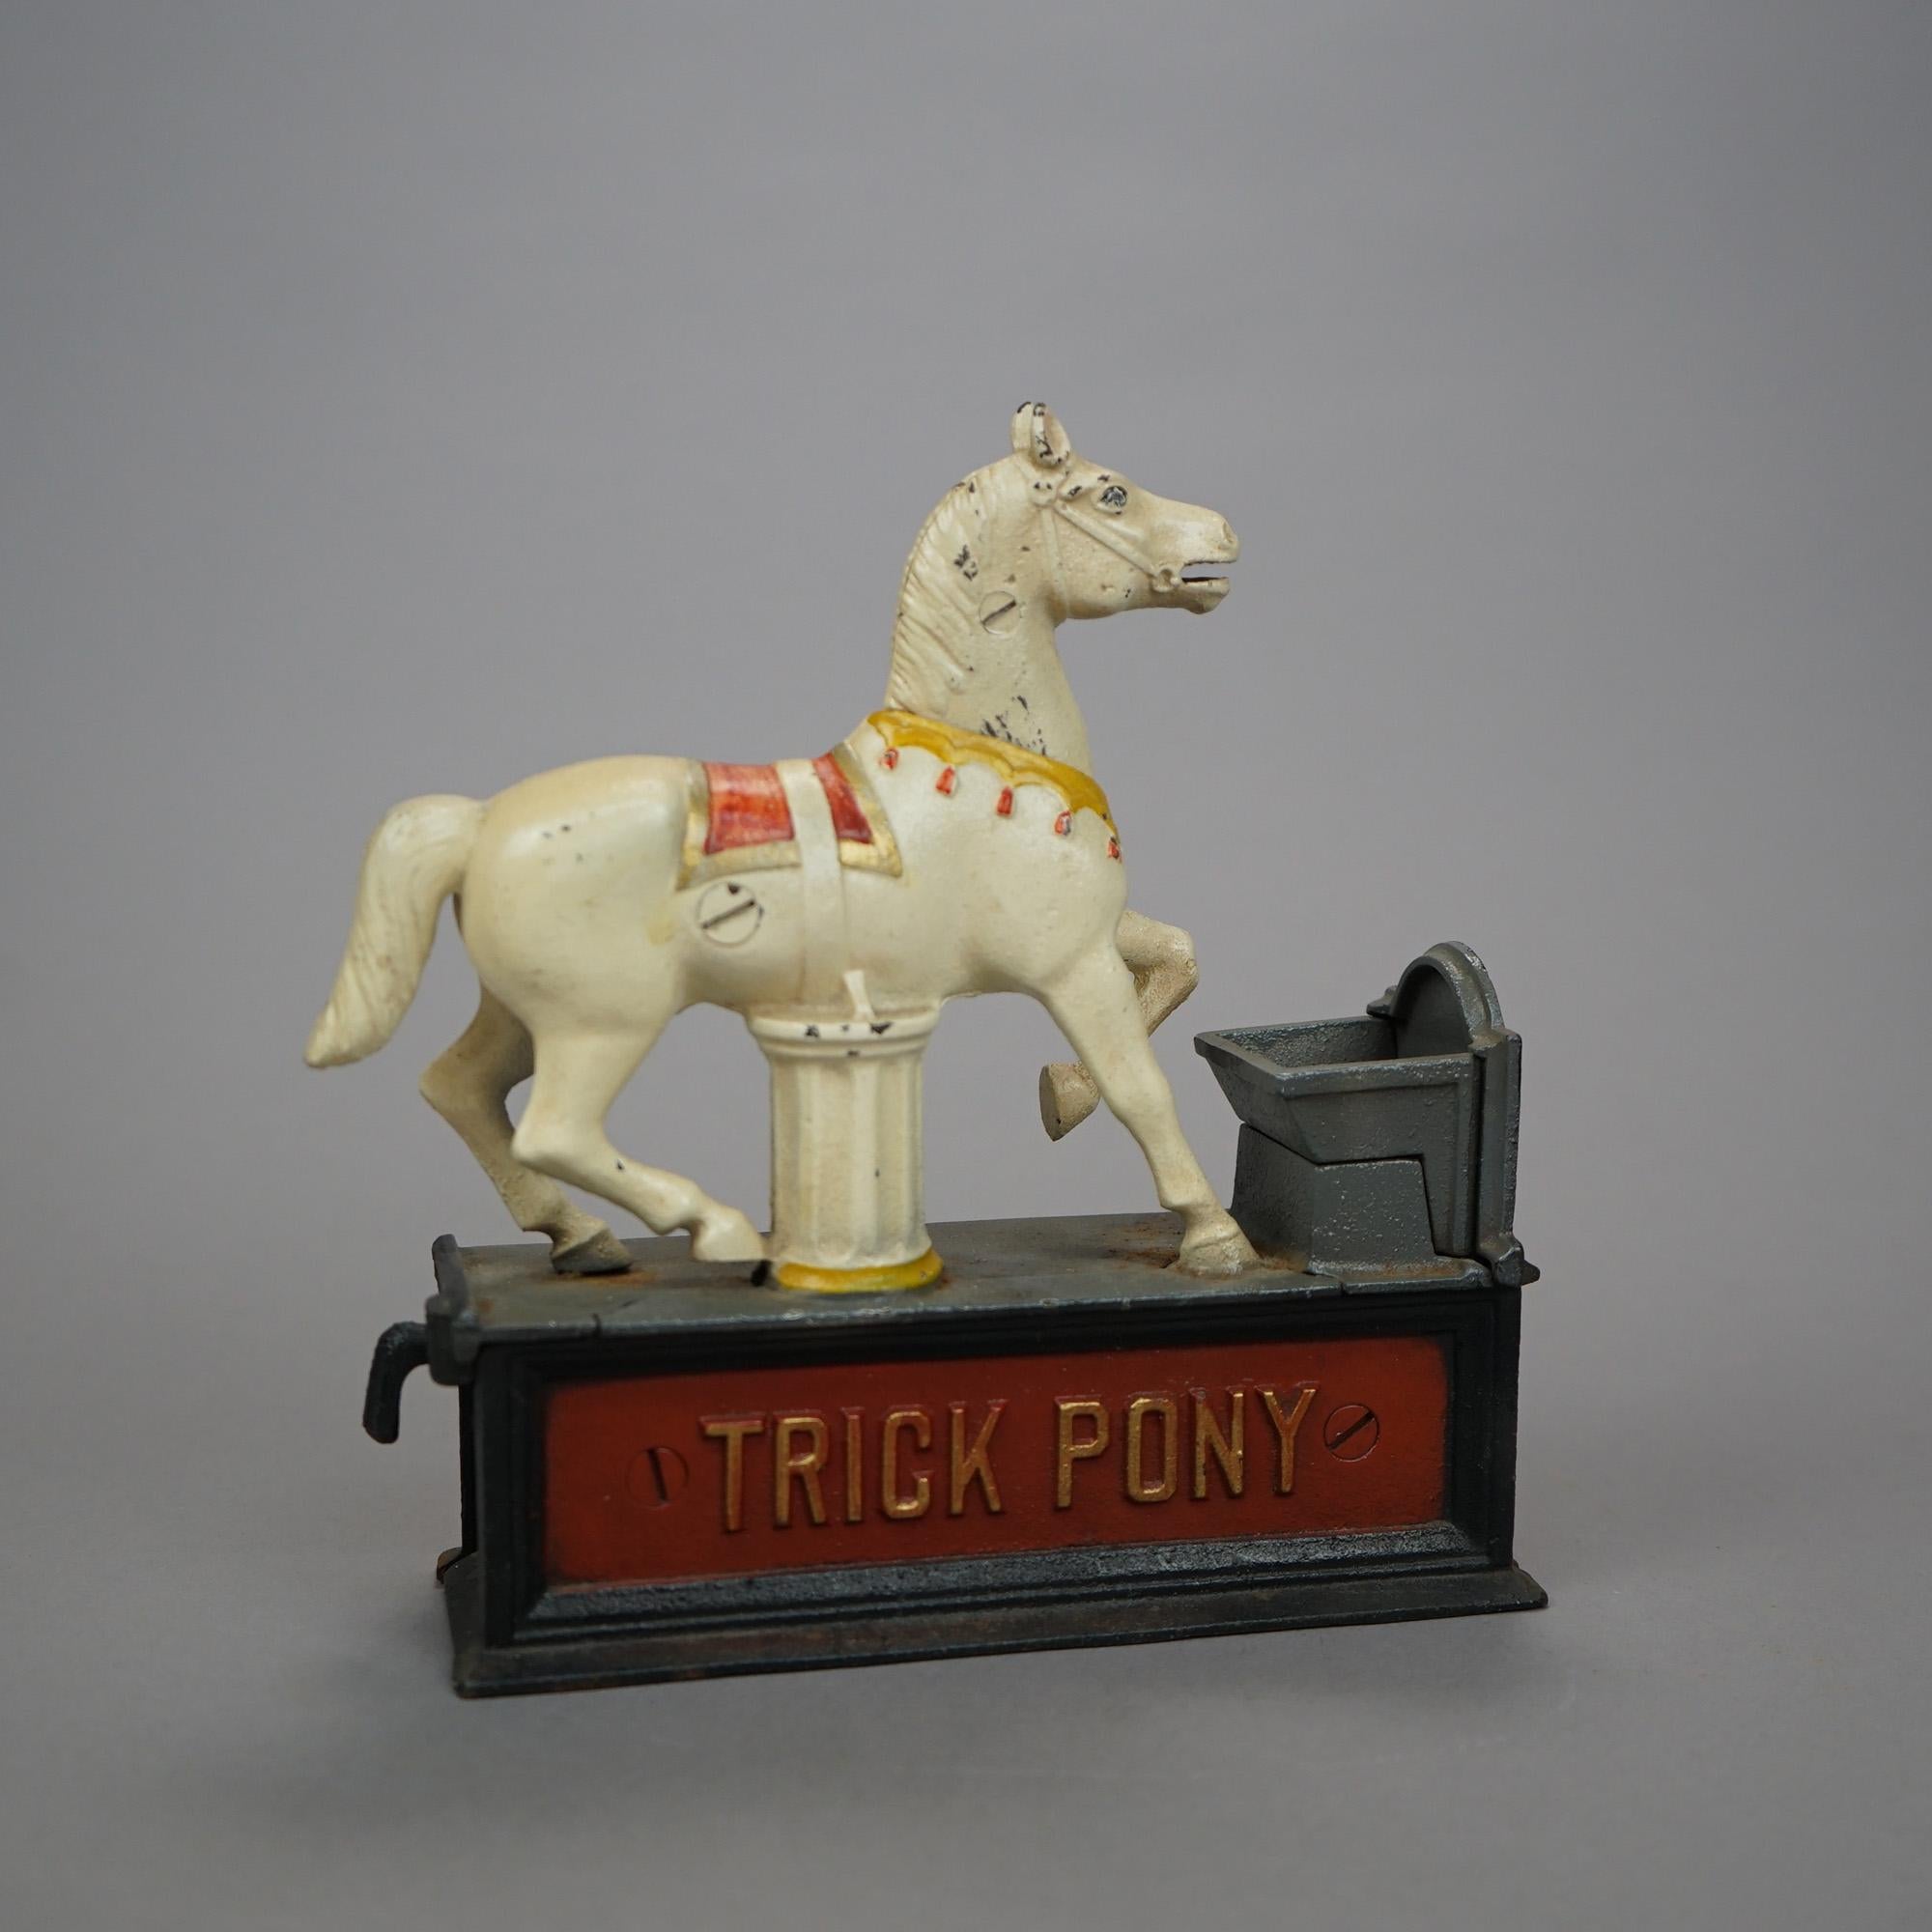 Vintage Book of Knowledge Cast Iron Mechanical Bank, Trick Pony, 20th Century In Good Condition For Sale In Big Flats, NY